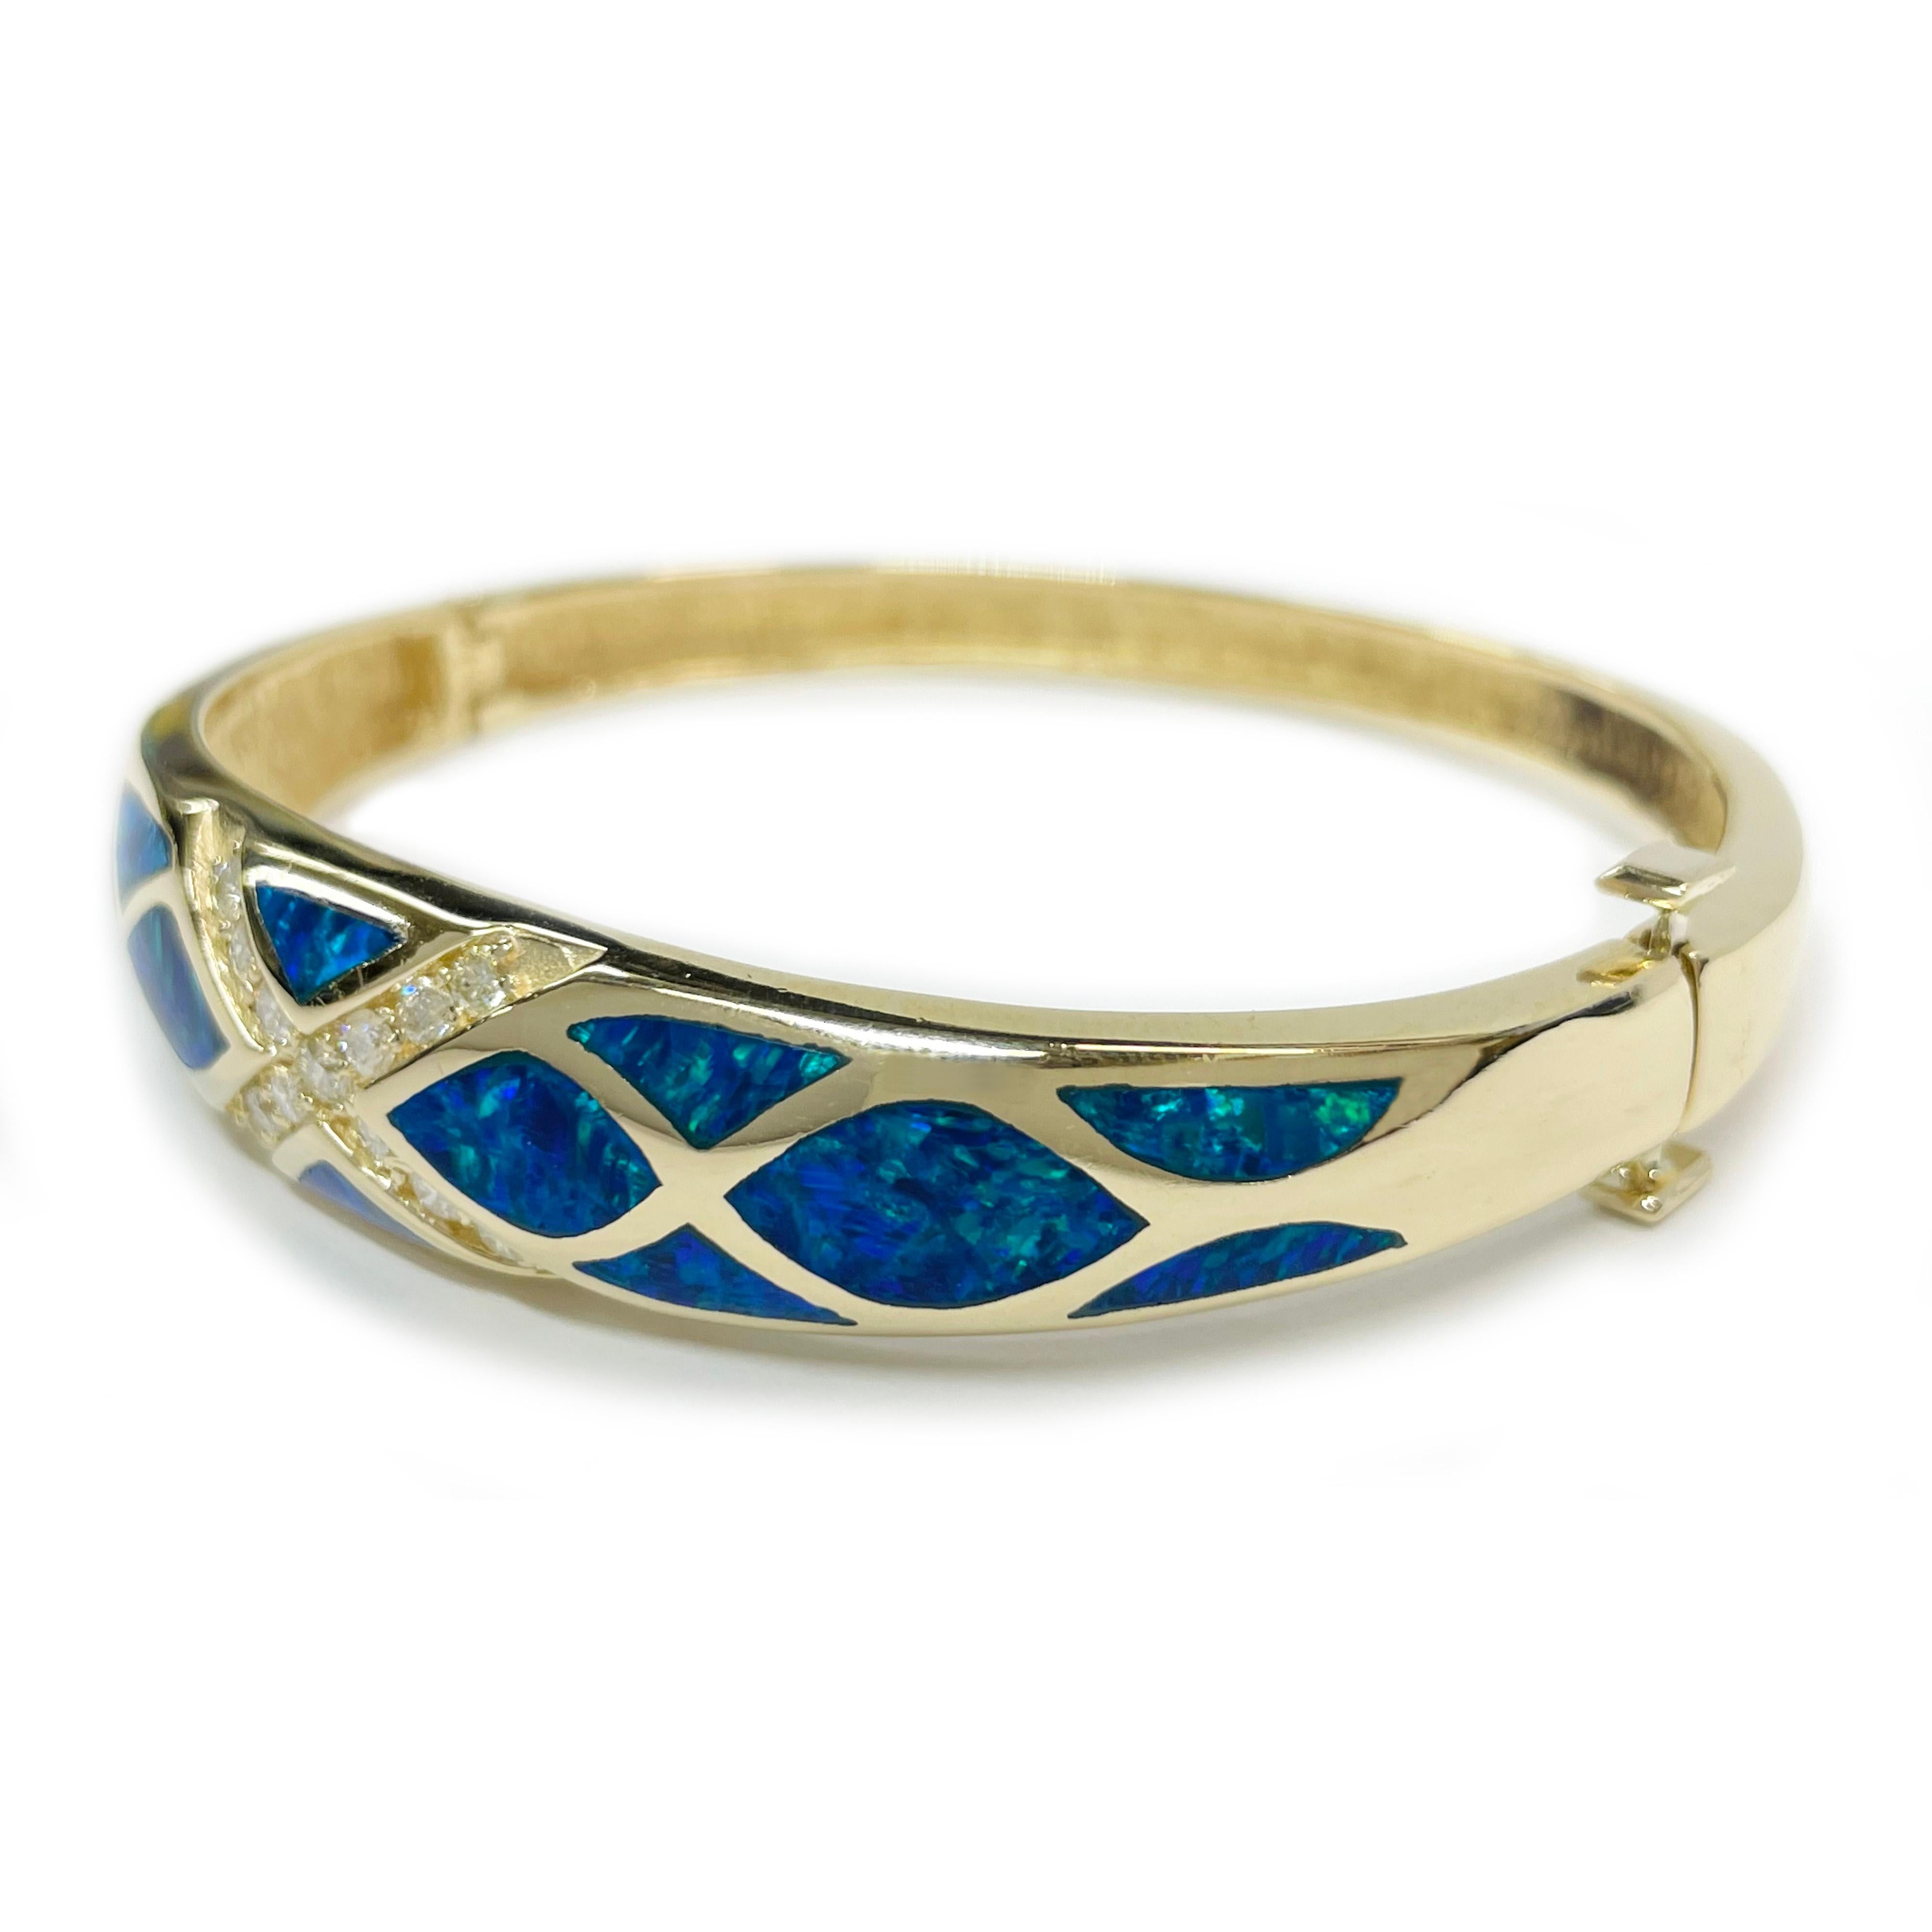 14 Karat Black Opal Bangle Hinged Bracelet. Absolutely striking bangle with diamonds set in a cross at the center and organic mermaid scale-like shaped inlays. The thirteen 2.5mm round prong-set diamonds have a carat total weight of 0.60ctw and are